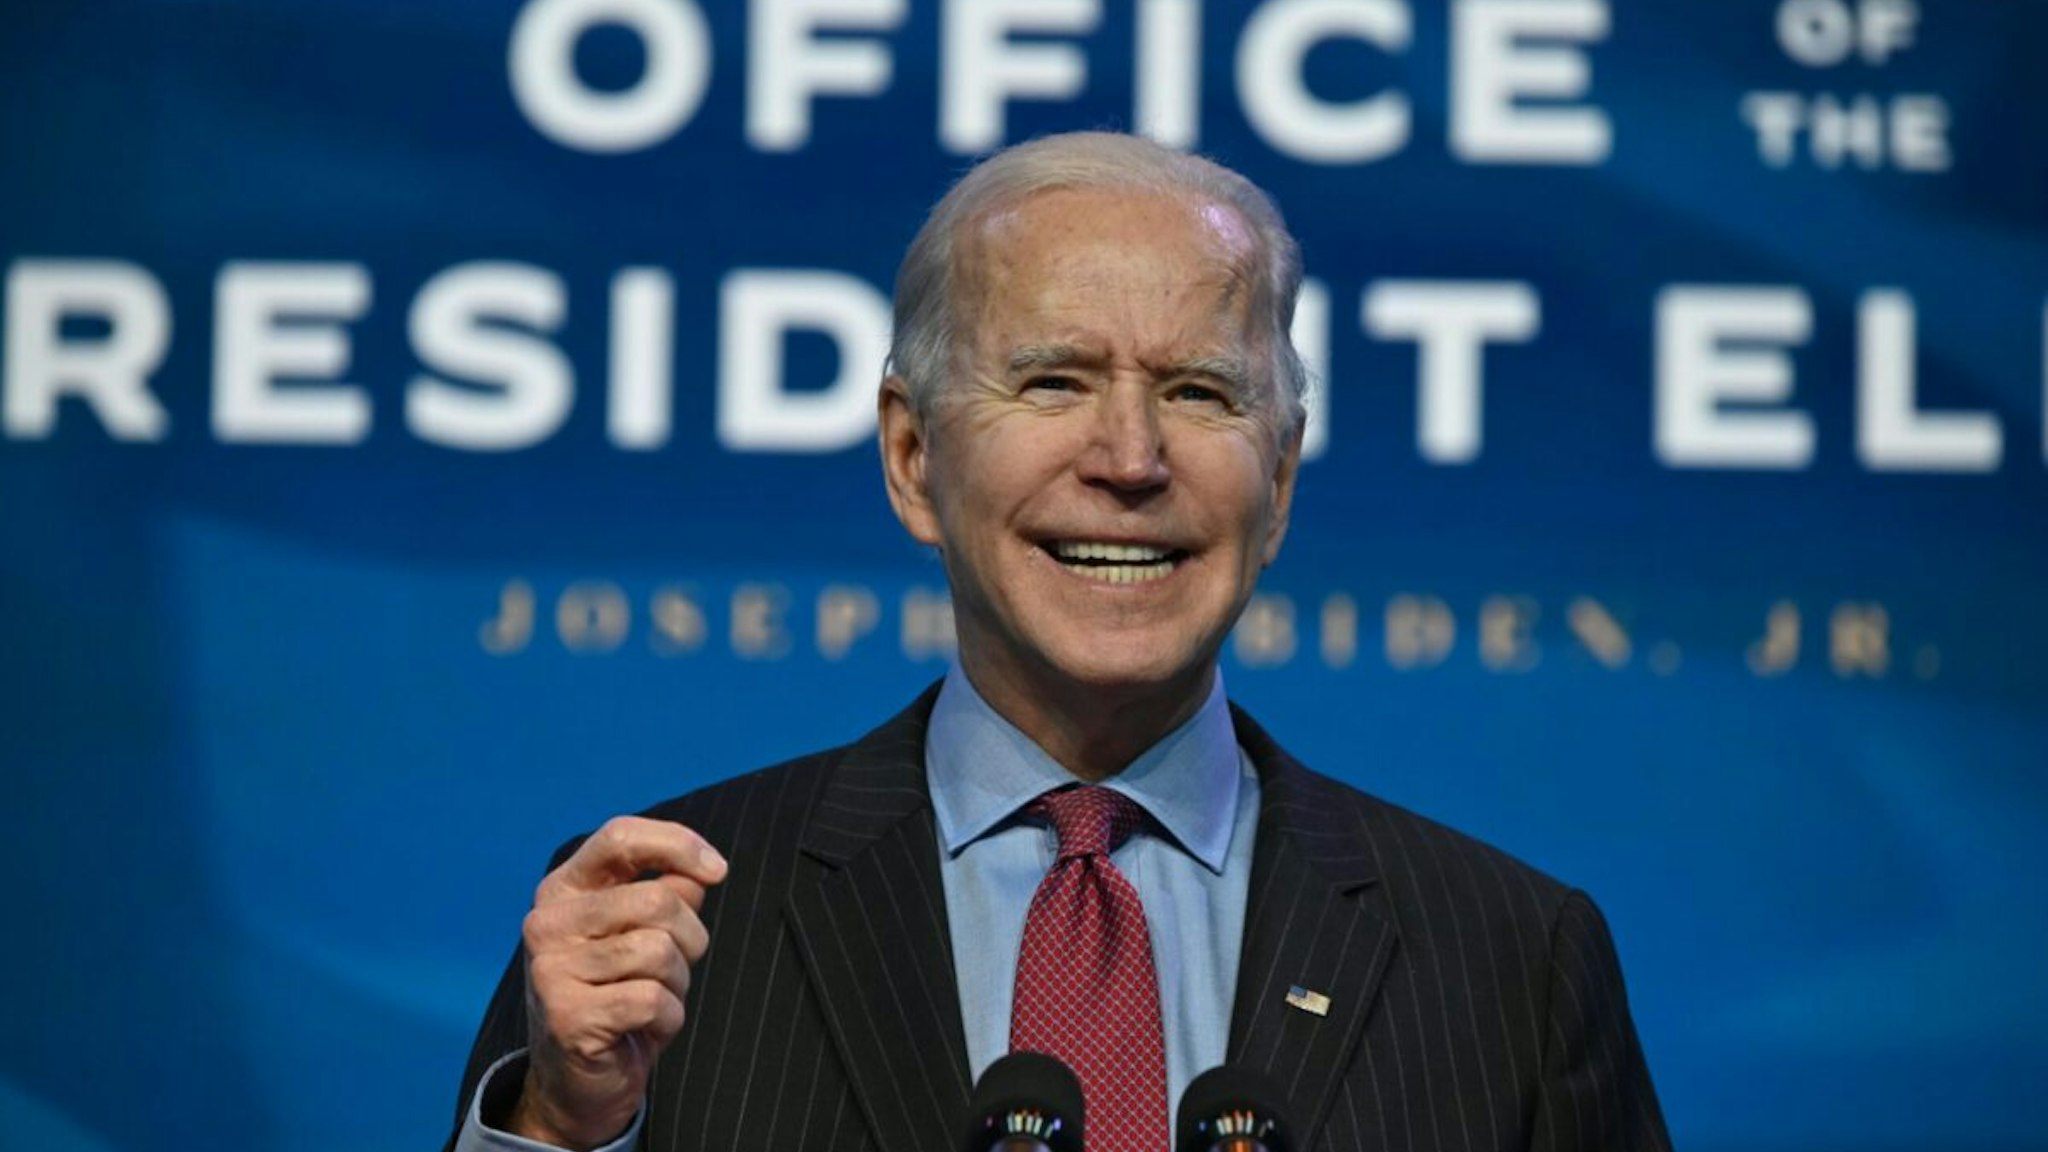 US President-elect Joe Biden speaks at The Queen theater in Wilmington, Delaware on January 8, 2021, to announce key nominees for his economic and jobs team.